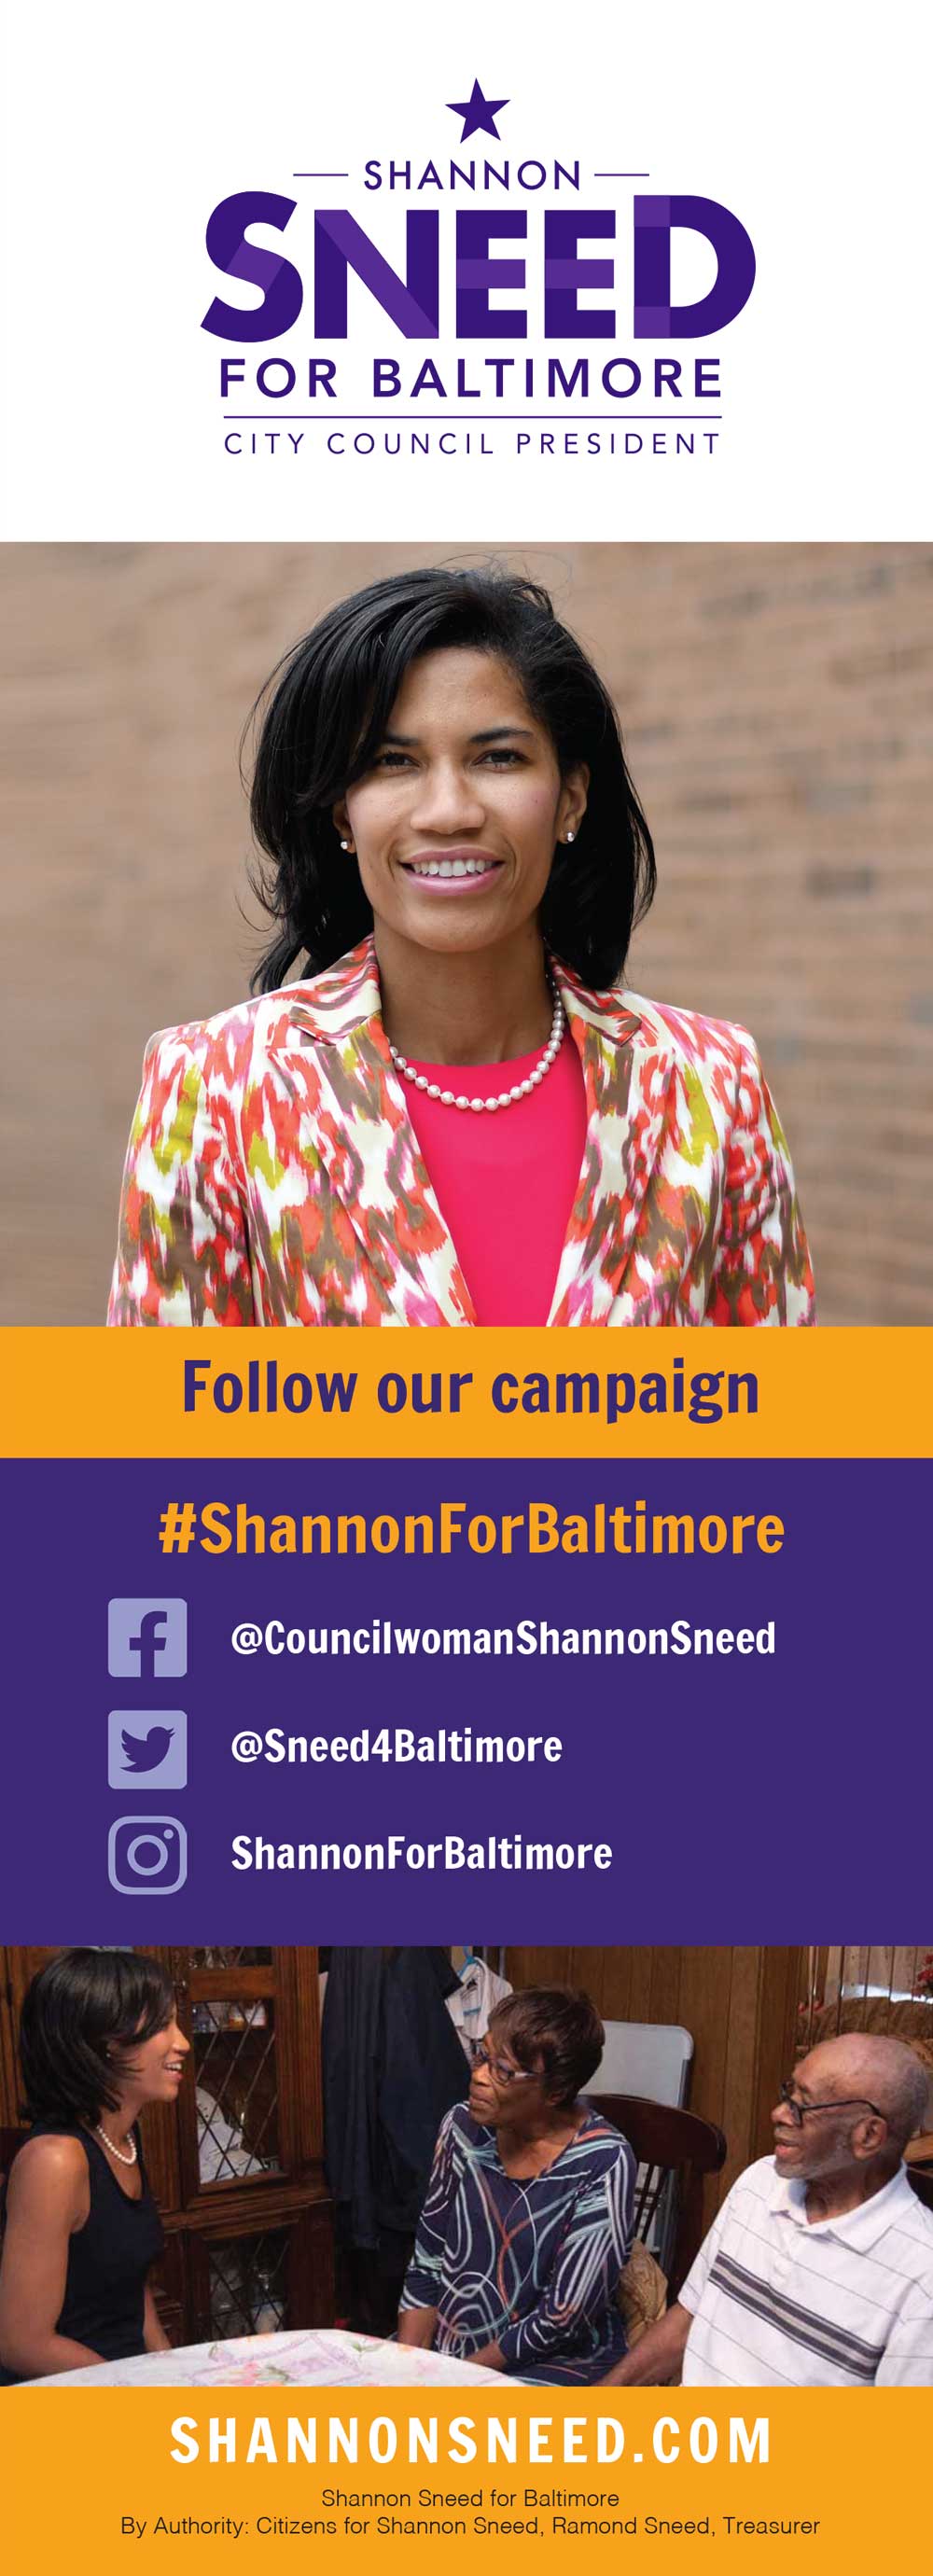 Shannon Sneed for Baltimore City Council campaign literature